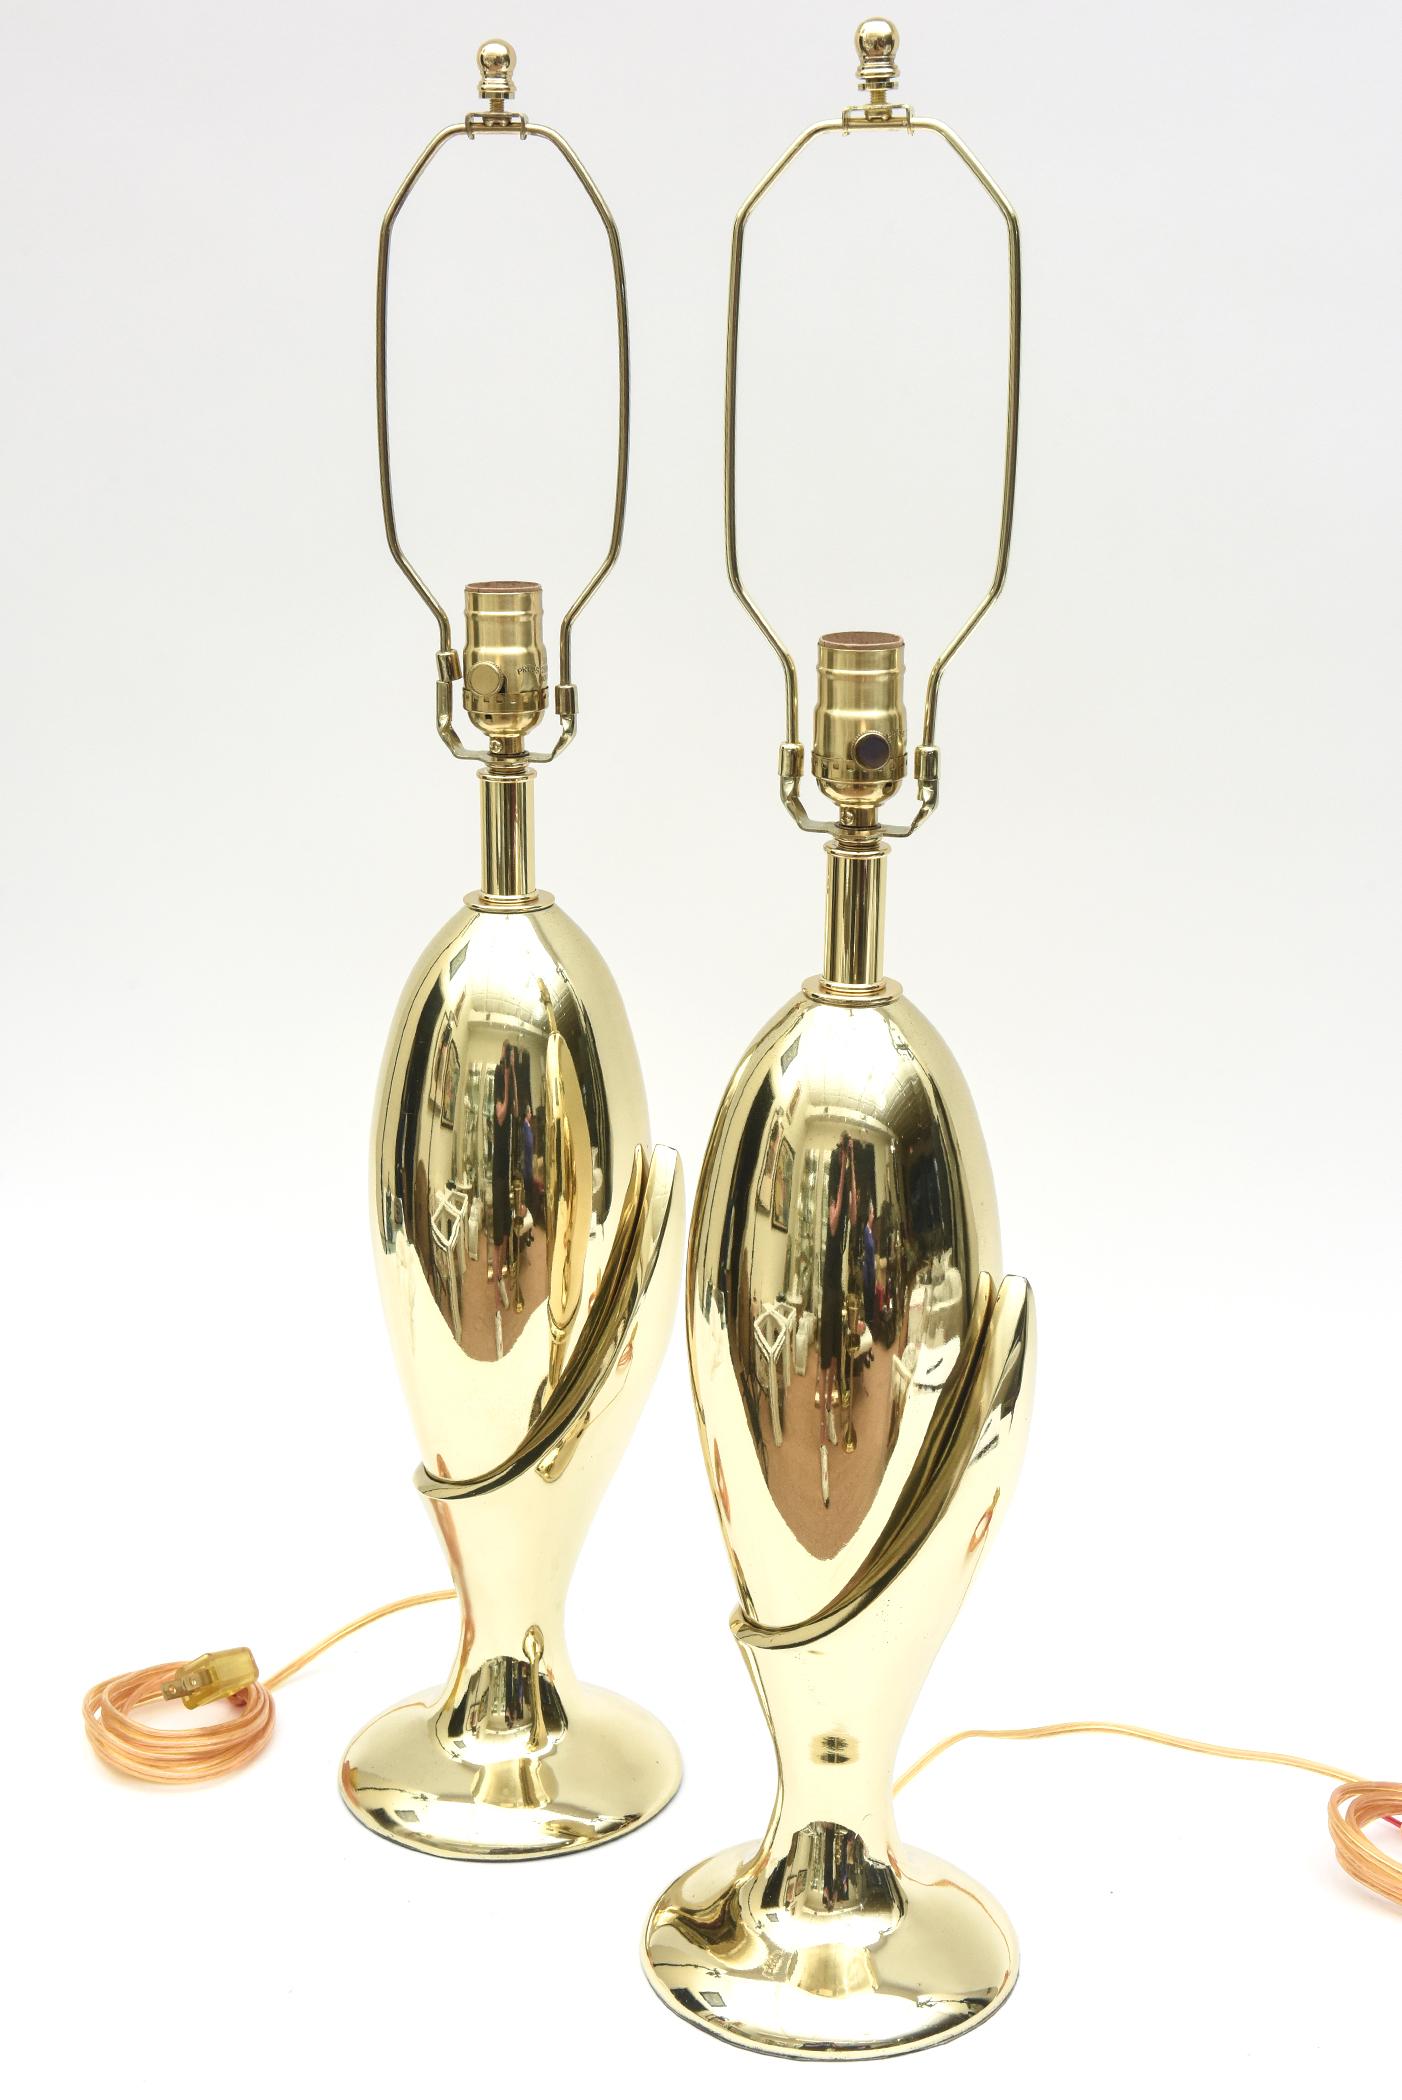 American Brass Plated Sculptural Laurel Lamp Co. Table Lamps Mid-Century Modern Pair of For Sale